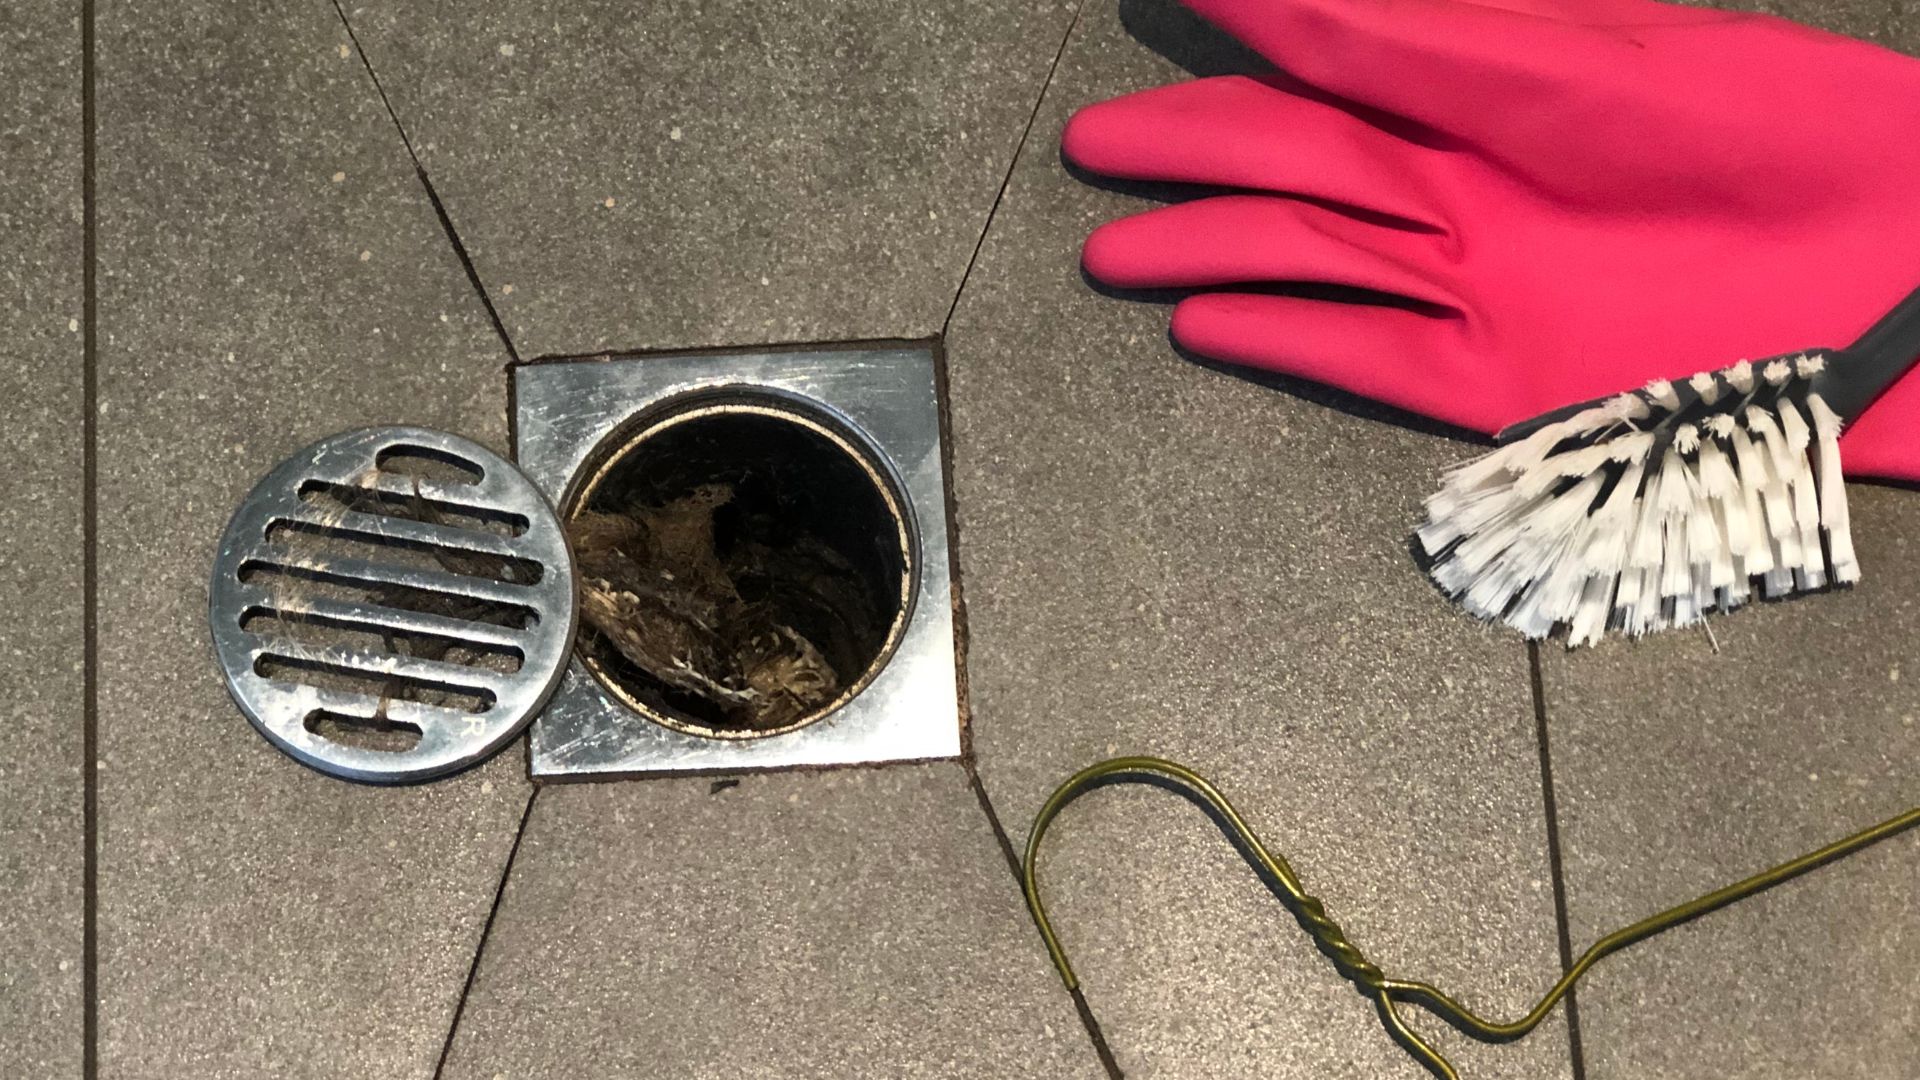 Fixing Overflowing Floor Drain With Tools